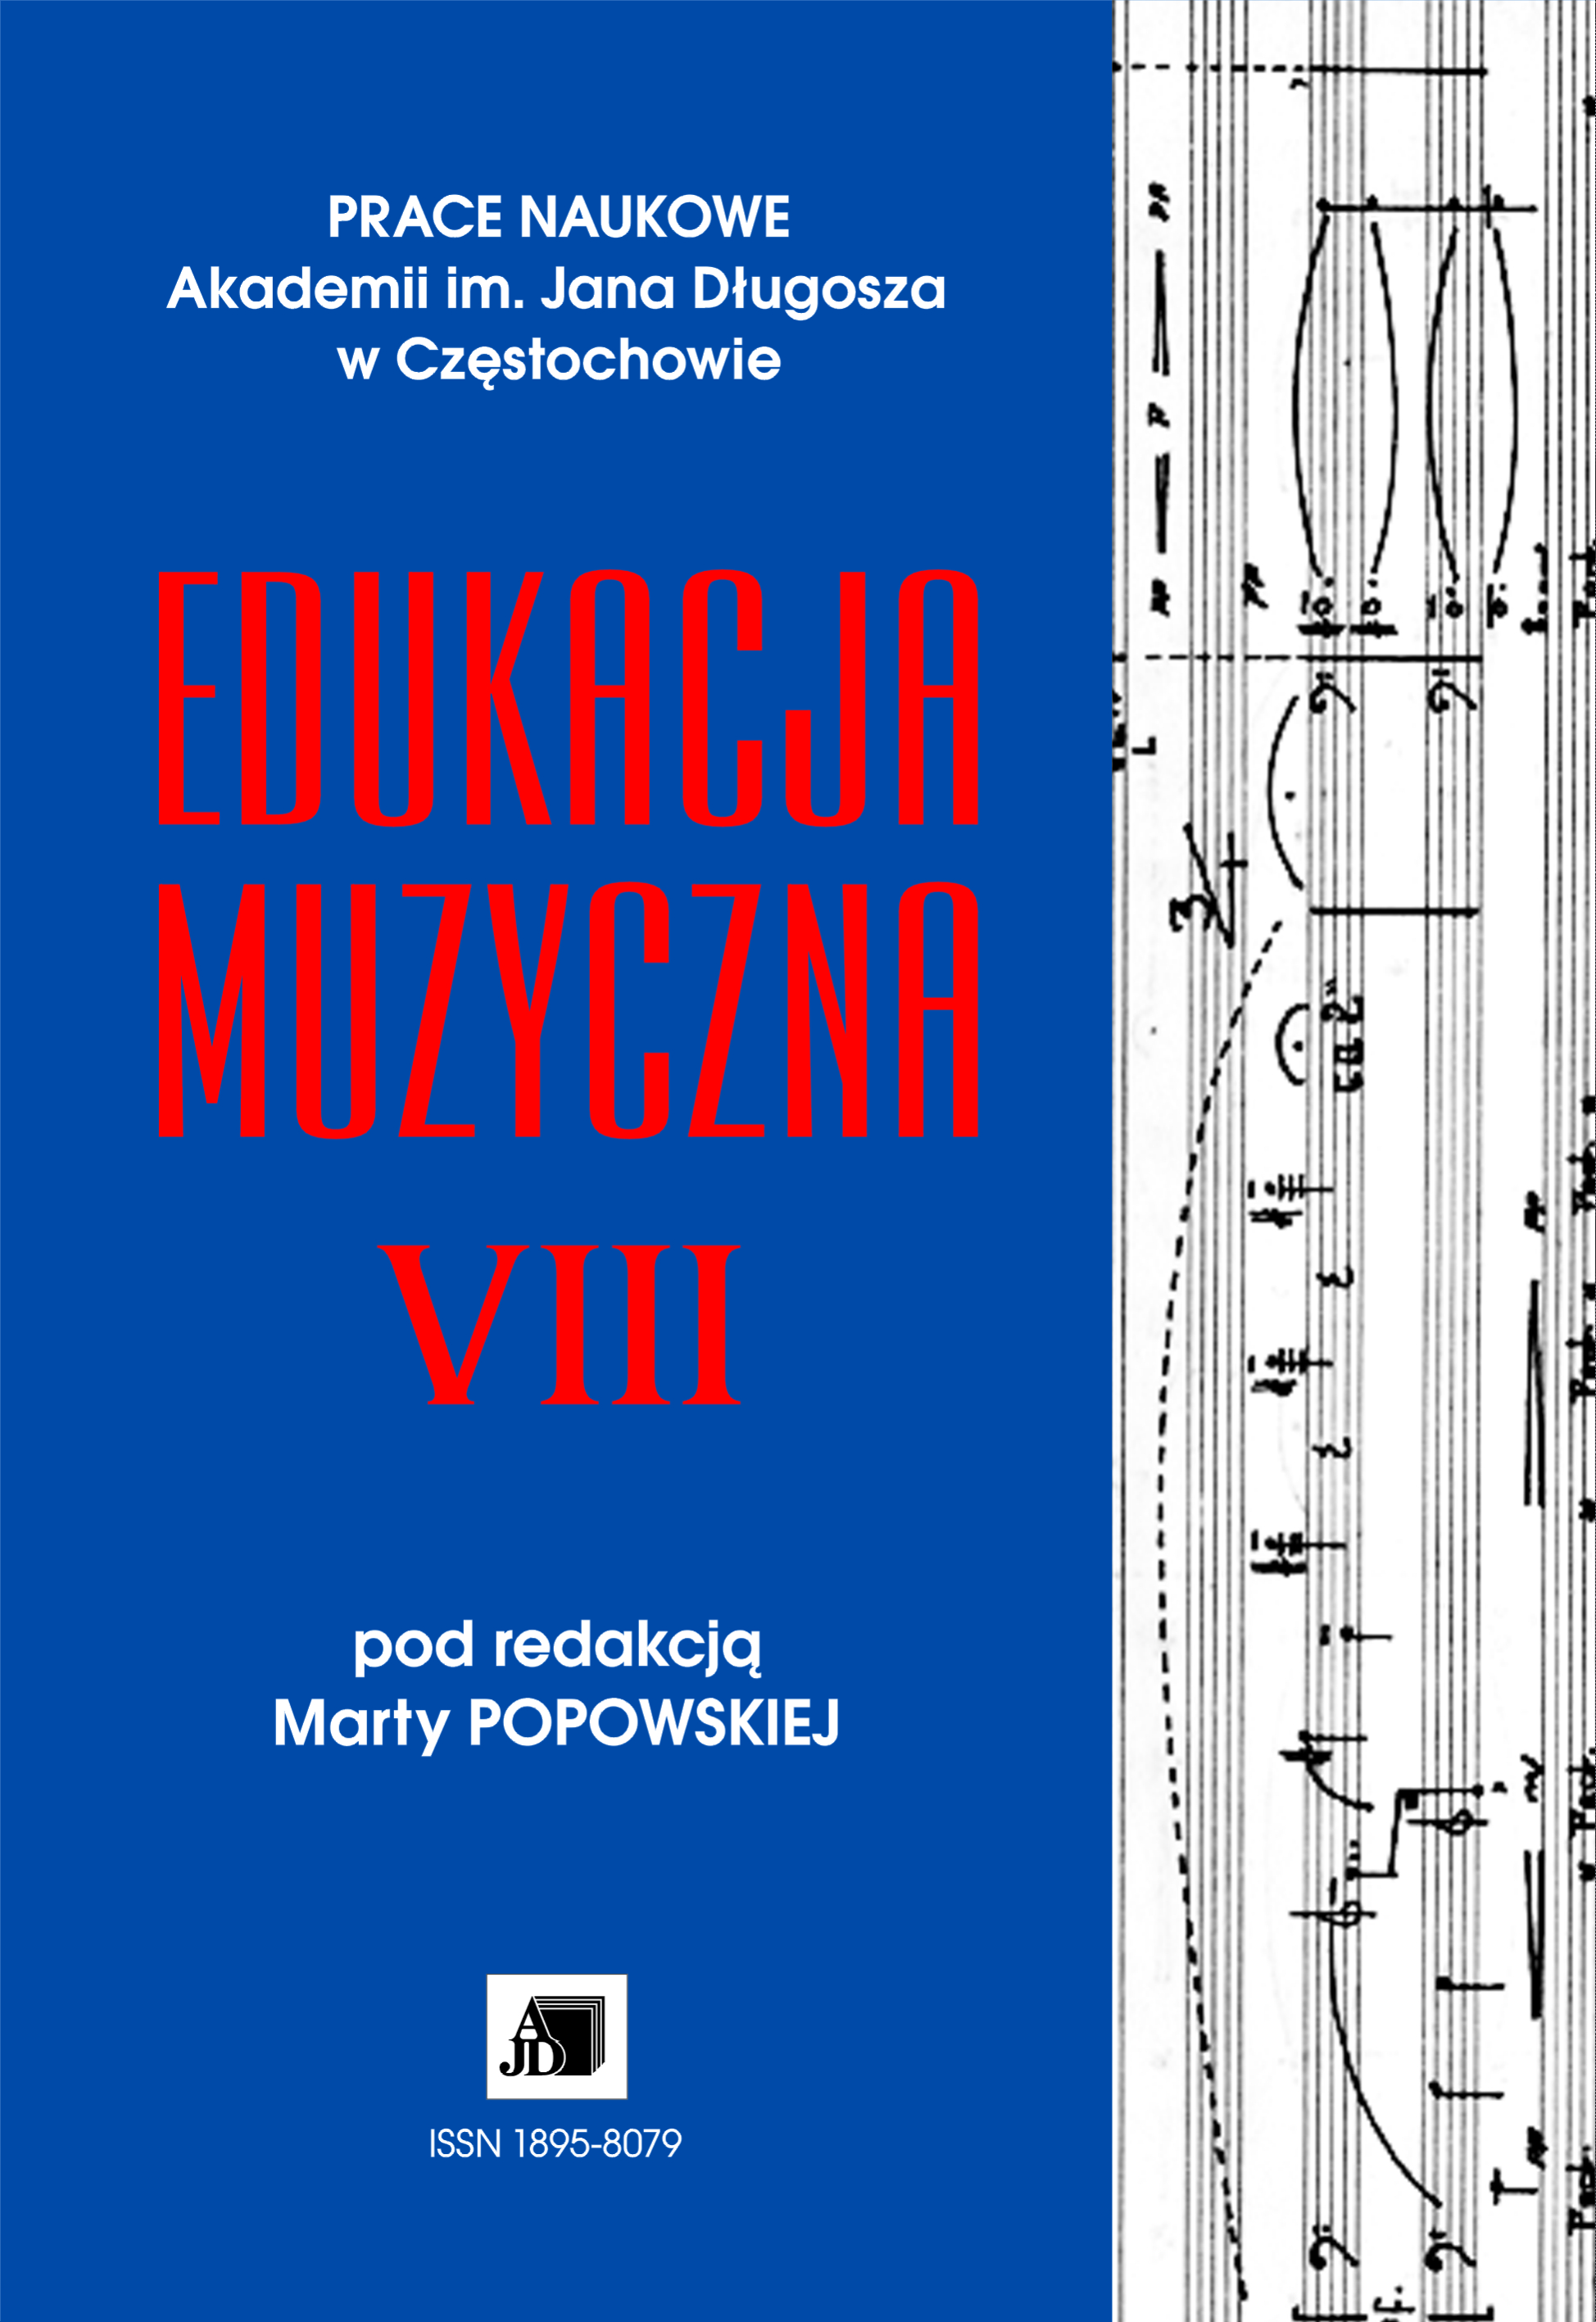 Selected Interpretation Problems in Pyotr Tchaikovsky’s  Symphony No. 6 in h-minor “Pathétique” – Conductor’s Remarks (Summary) Cover Image